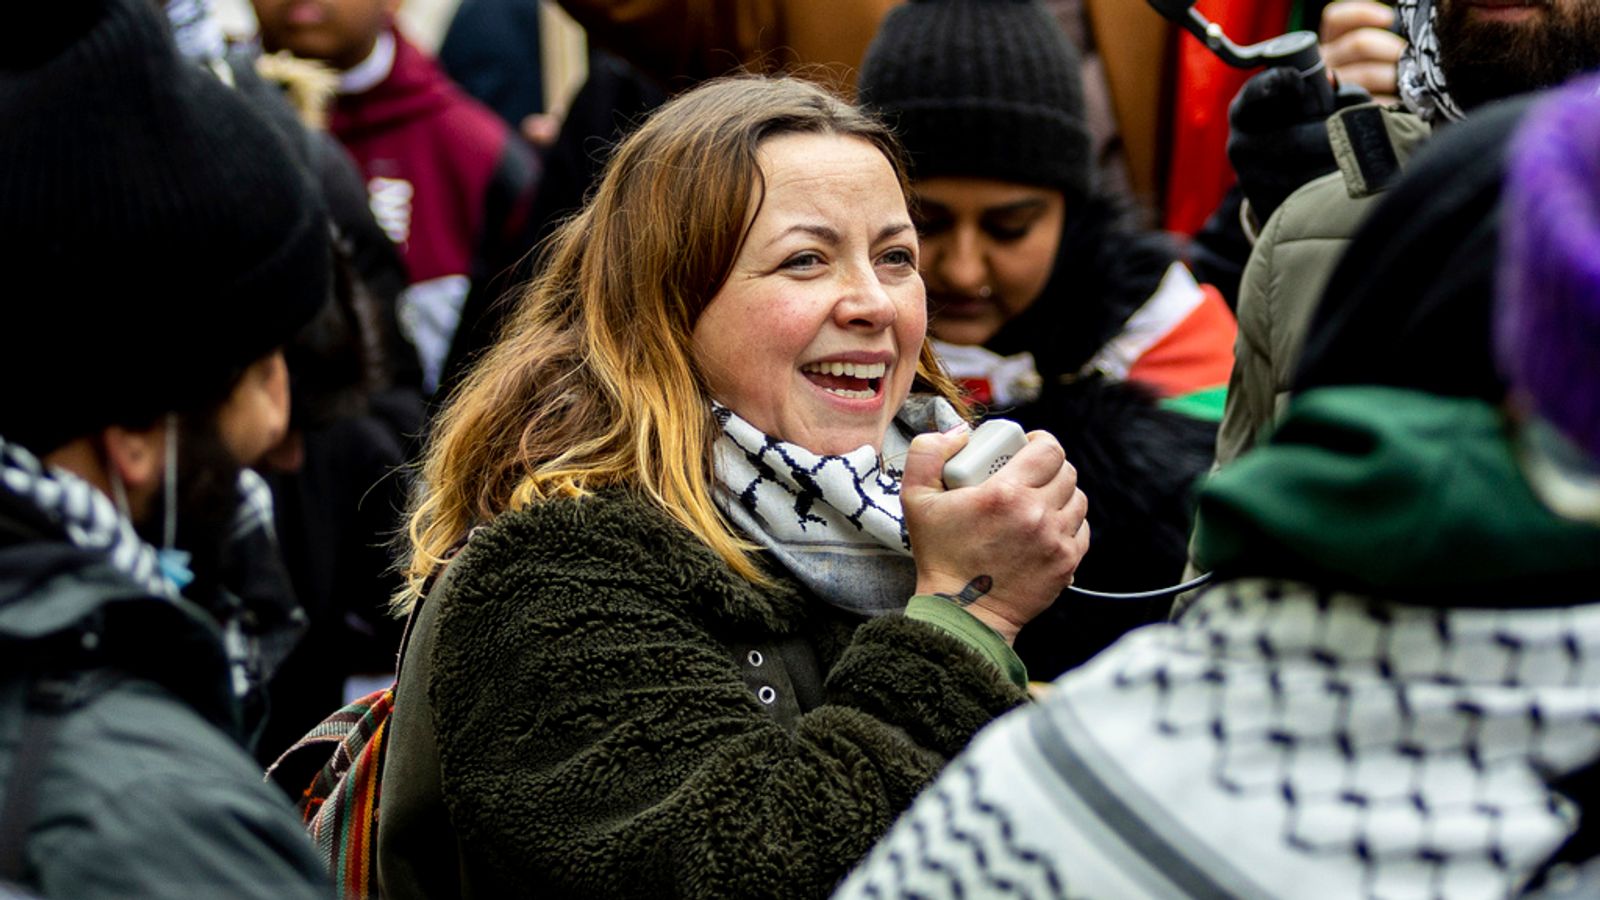 Charlotte Church denies antisemitism accusations after leading choir in pro-Palestinian chant